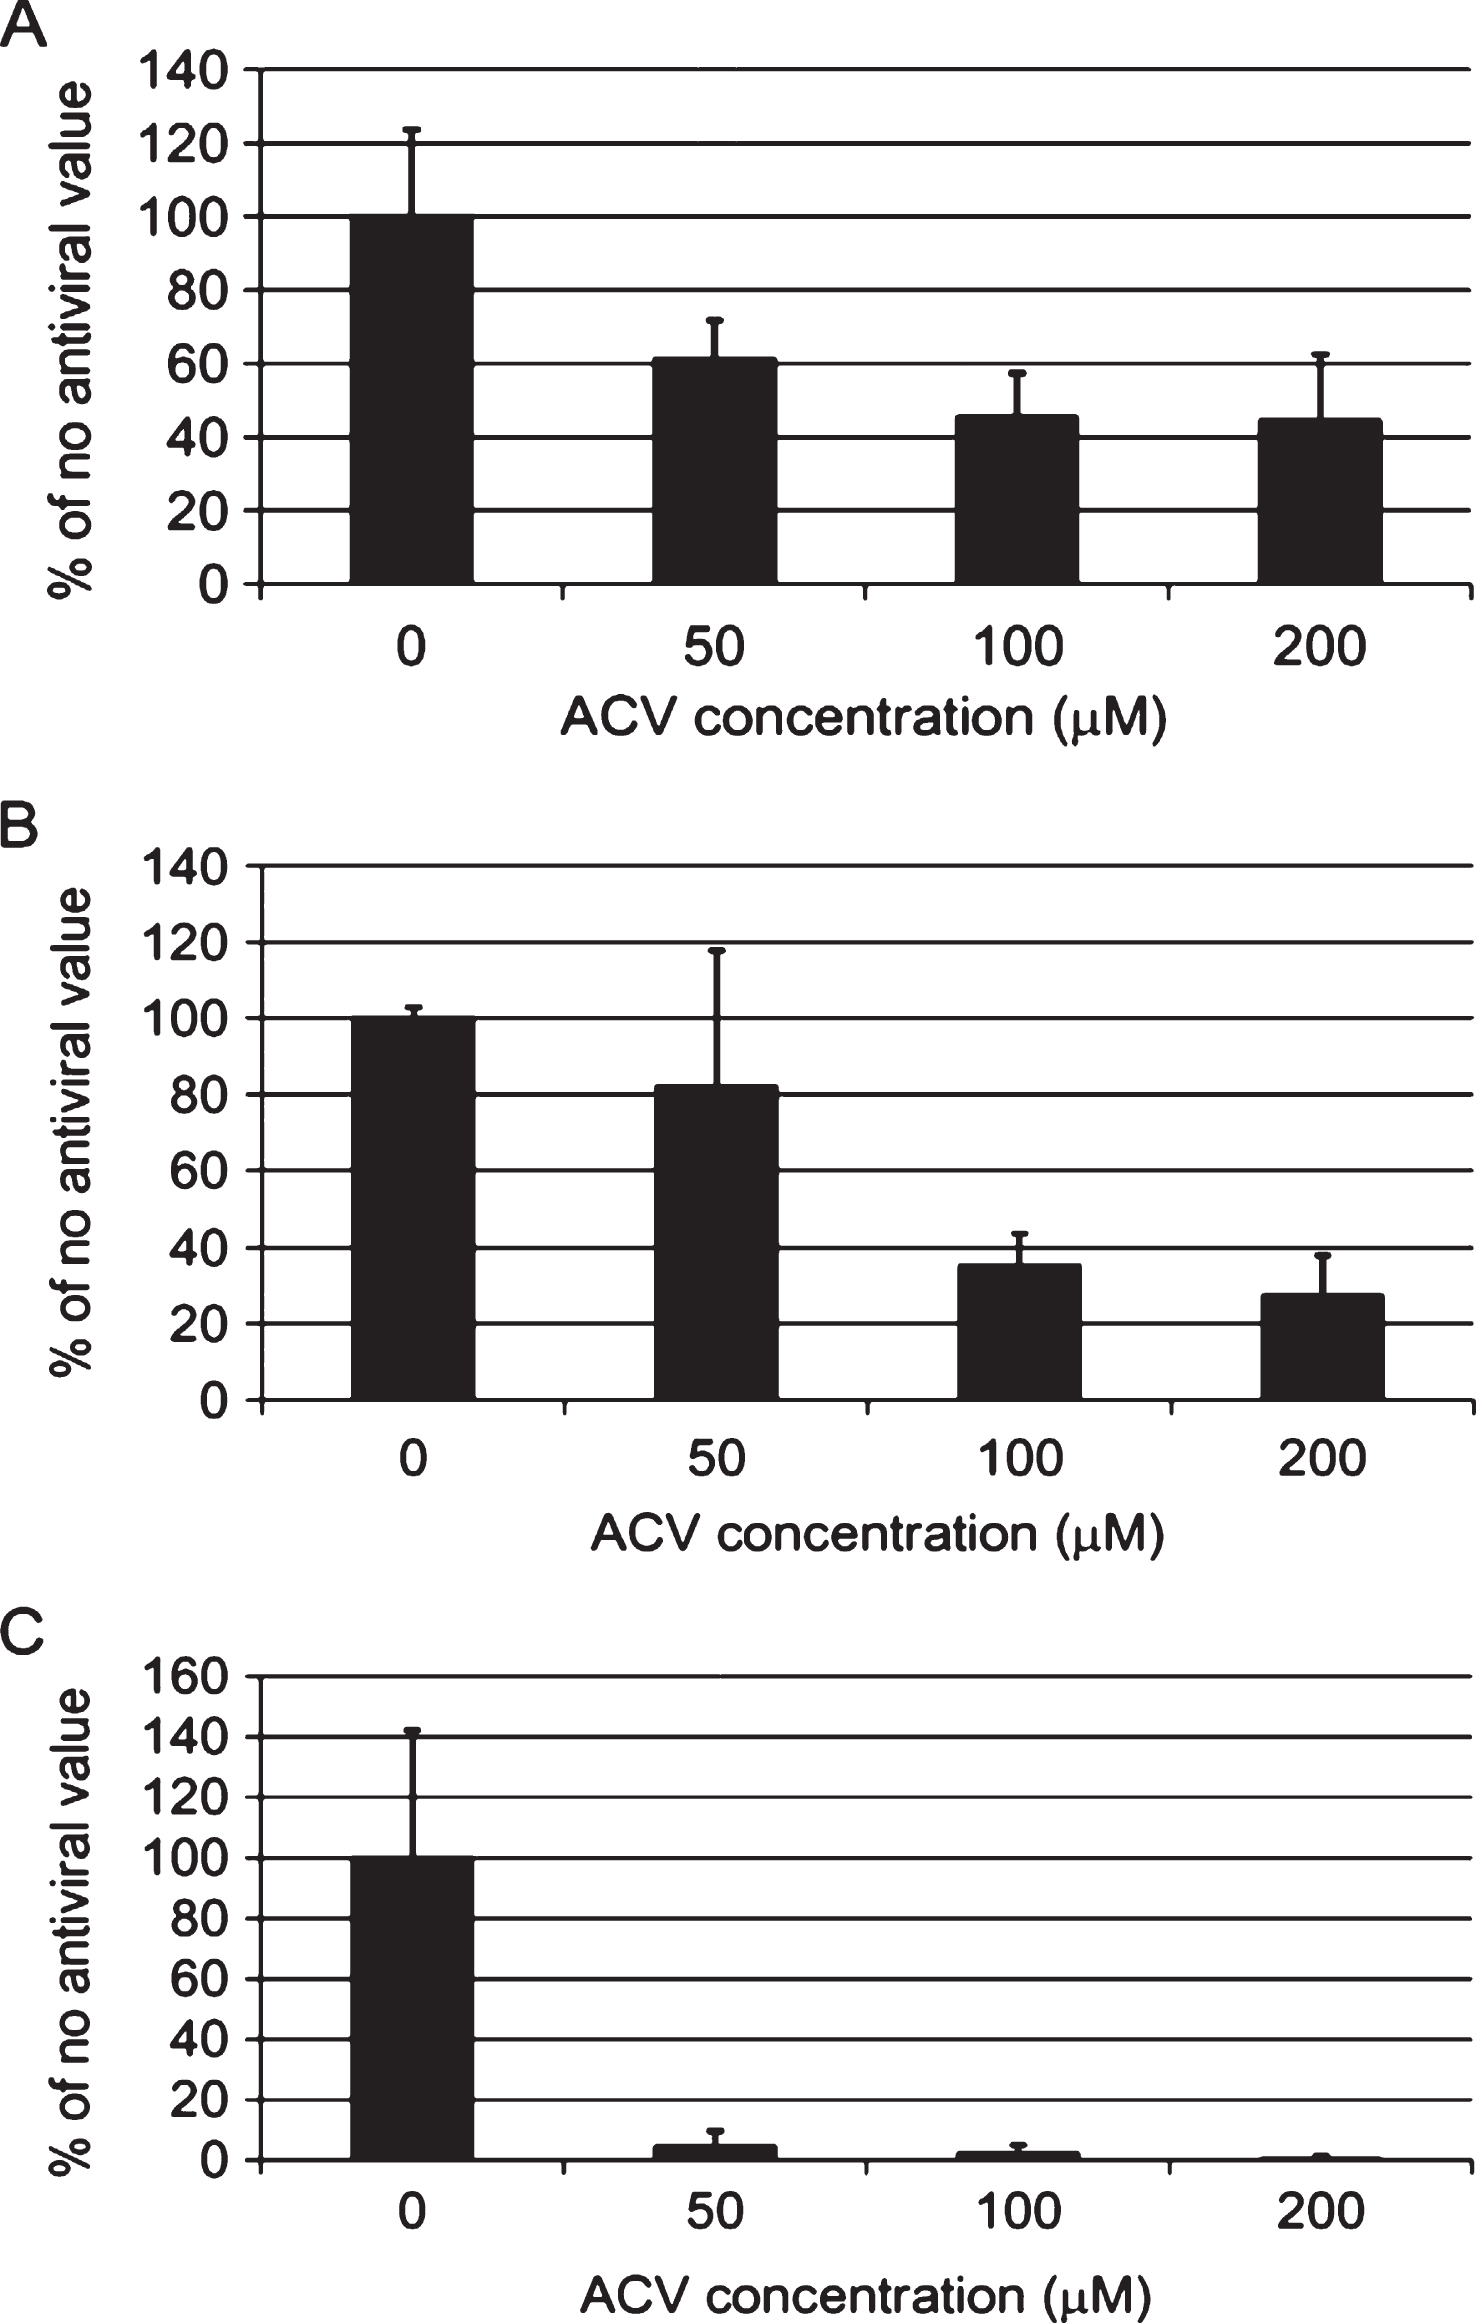 Quantification of HSV-1 proteins (A), amyloid-β (B), and abnormal tau phosphorylation (C) in HSV-1-infected cells after acyclovir treatment. HSV-1 infected vero cell cultures treated with 0μM, 50μM, 100μM, or 200μM acyclovir (ACV). ACV significantly inhibited replication of HSV-1 as shown by a decrease in HSV-1 proteins (A). Aβ in cell cultures was reduced by 70% at a 200μM concentration of acyclovir (B). Abnormal tau phosphorylation was reduced nearly 100% at a 200μM concentration of acyclovir (C). p <  0.0001 compared to controls at all ACV concentrations for A and C and at 100μM and 200μM ACV concentrations for B. Graph from Wozniak MA et al. (2011) Antivirals reduce the formation of key Alzheimer’s disease molecules in cell cultures acutely infected with Herpes simplex virus type 1. PLoS One 6, e25152 [166]. Copyright 2011. Reprinted under the terms of the Creative Commons Attribution License, (http://creativecommons.org/licenses/by/2.0) and permission from Ruth Itzhaki.